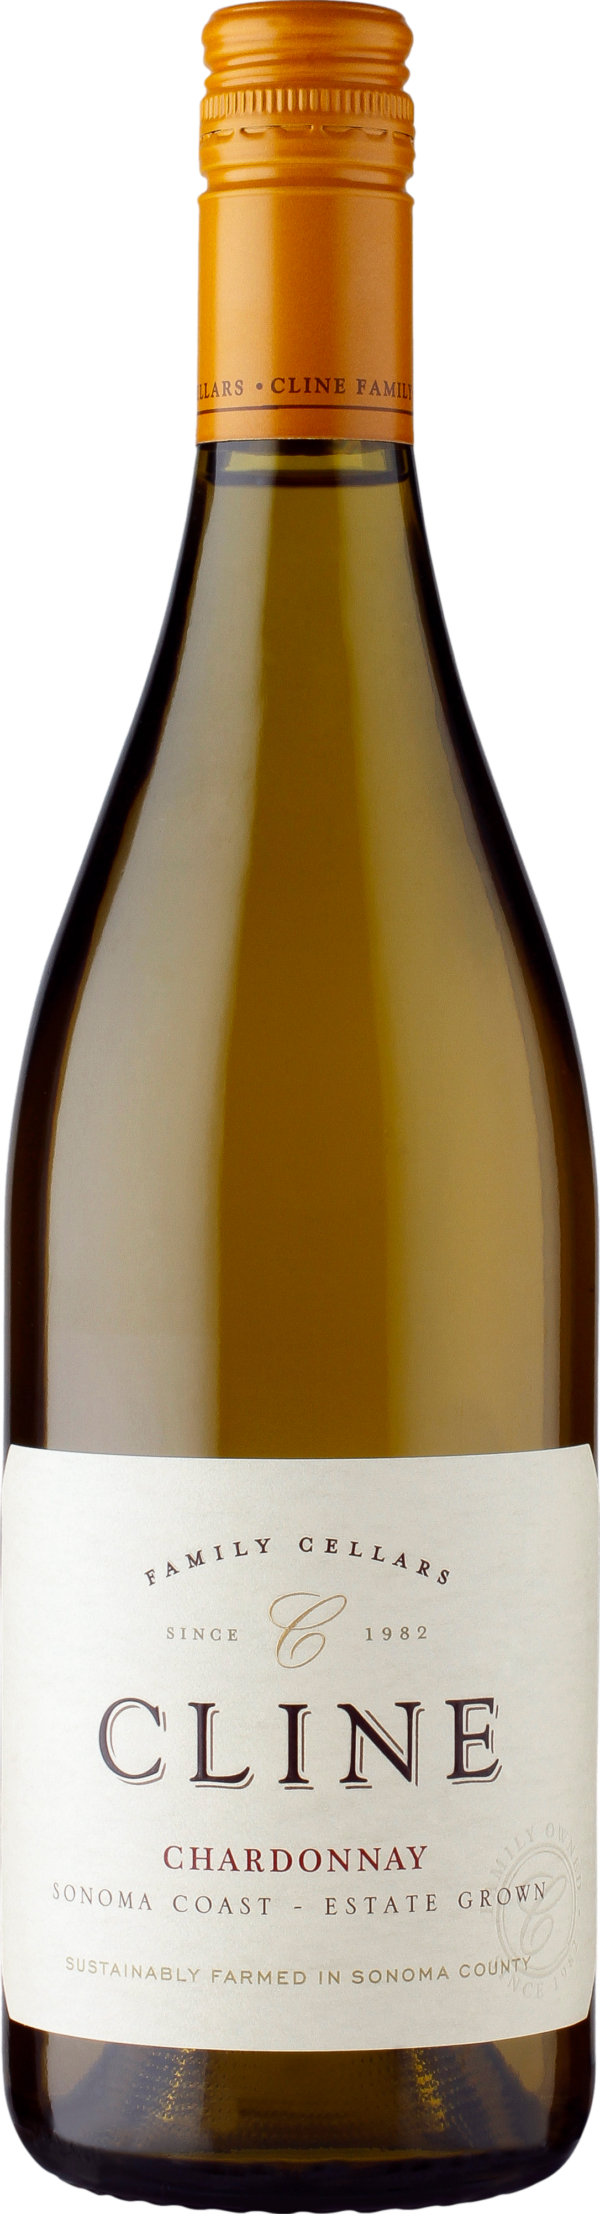 Product image of Cline Chardonnay 2020 from 8wines